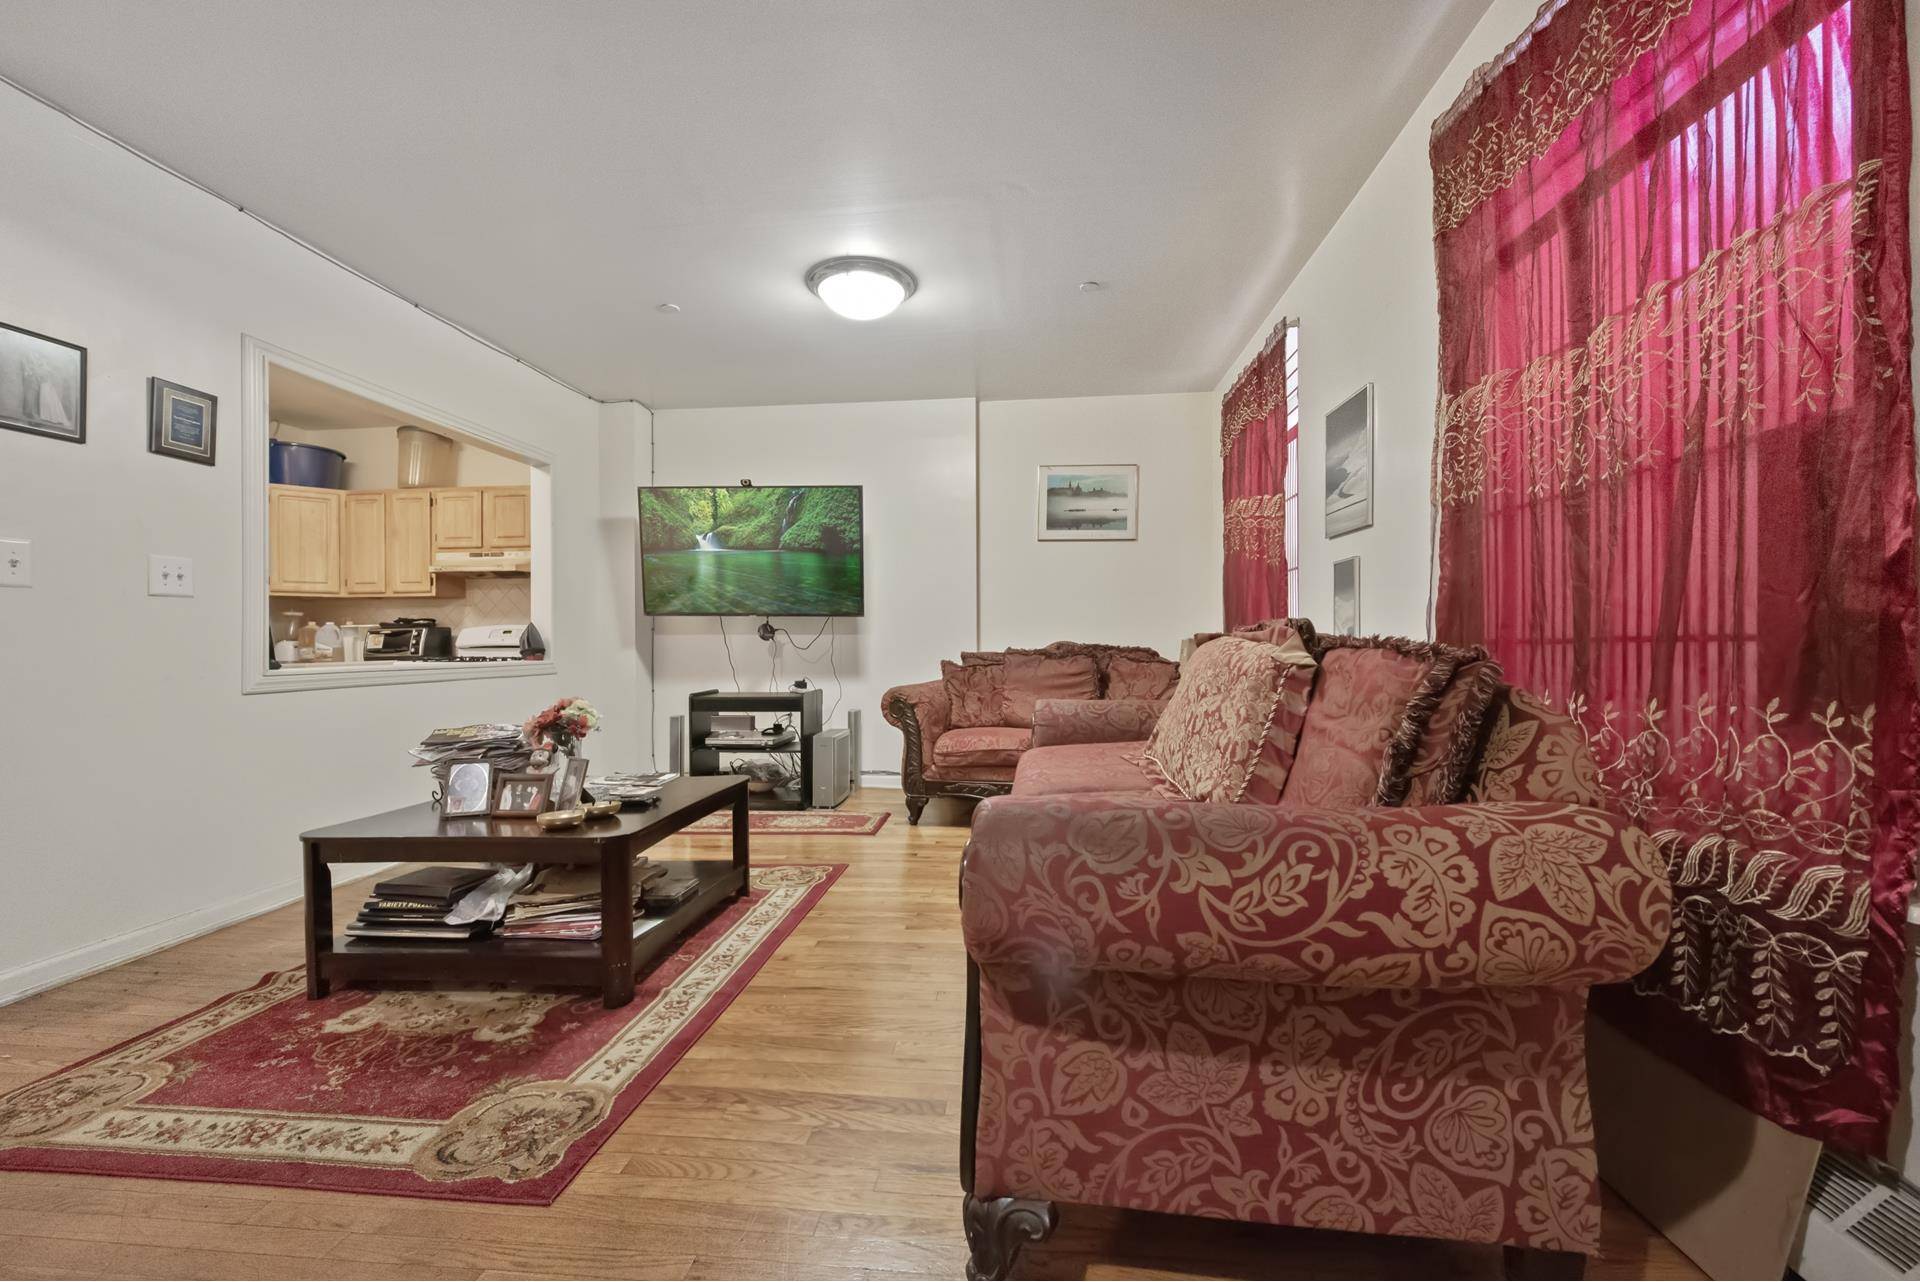 Enormous 4 bedroom, townhouse style home in this gorgeous brownstone on West 135th Street !